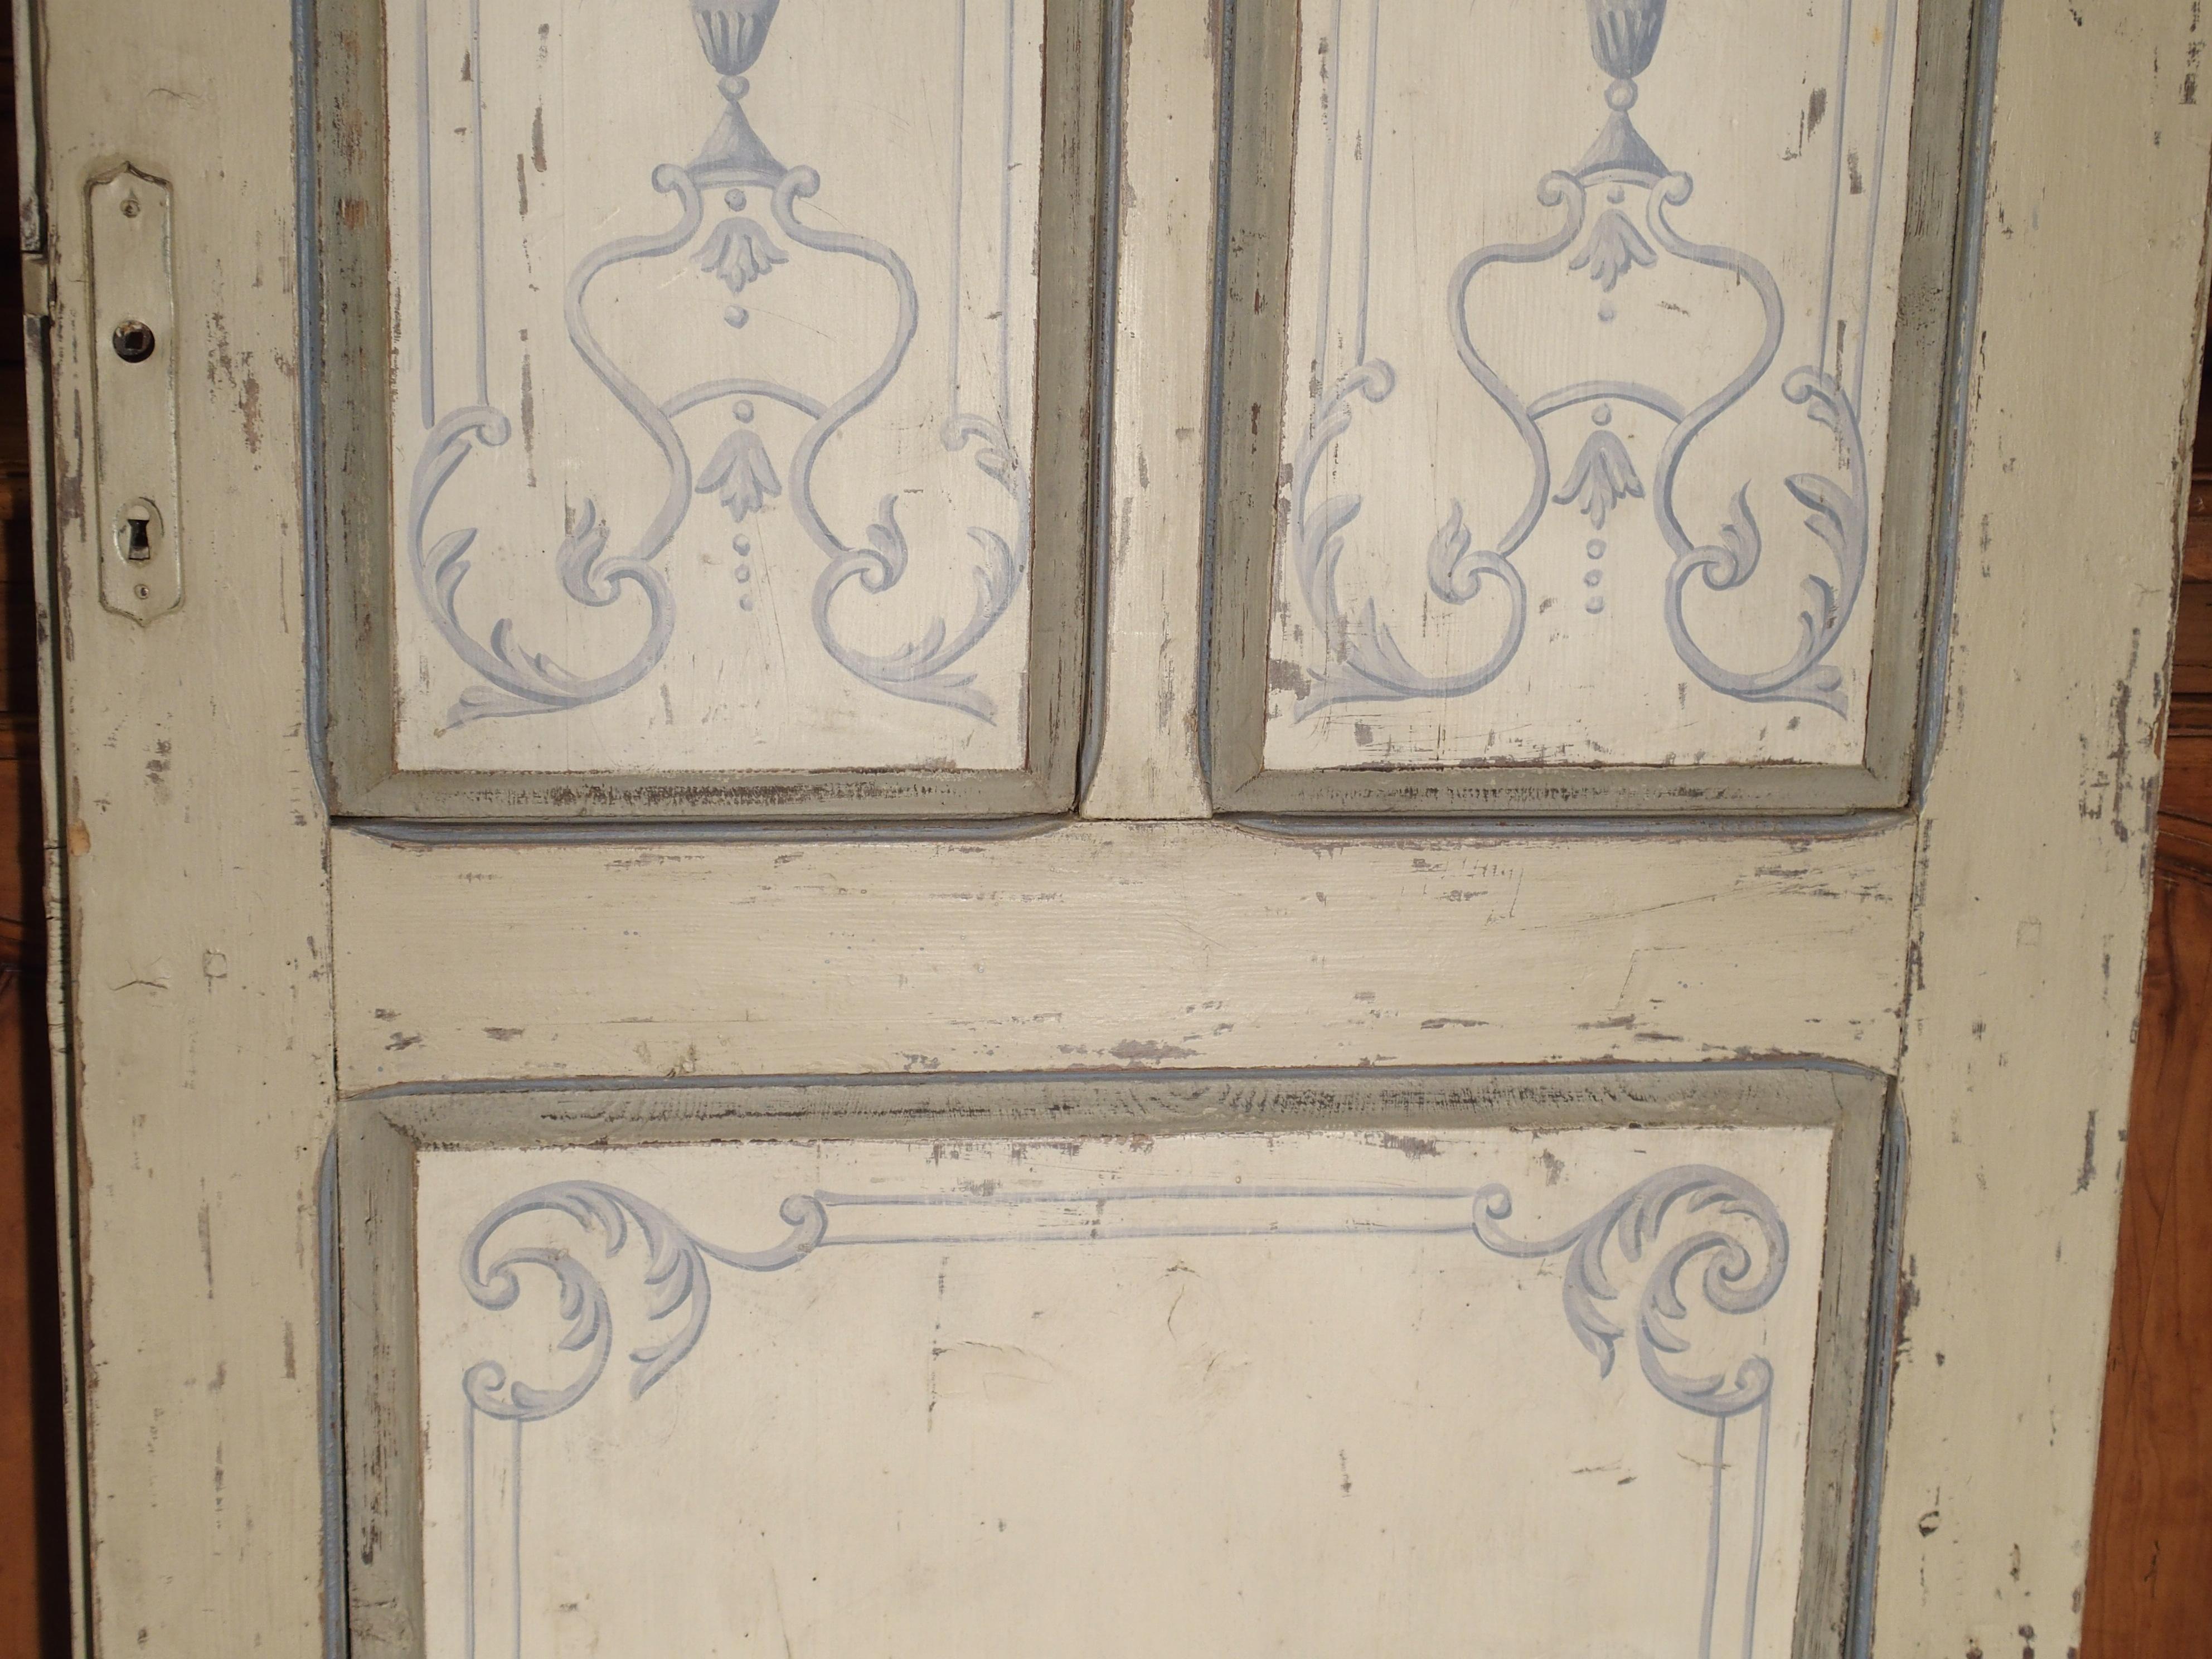 Wood Blue and White Painted Antique Door from Lombardy, Italy circa 1850